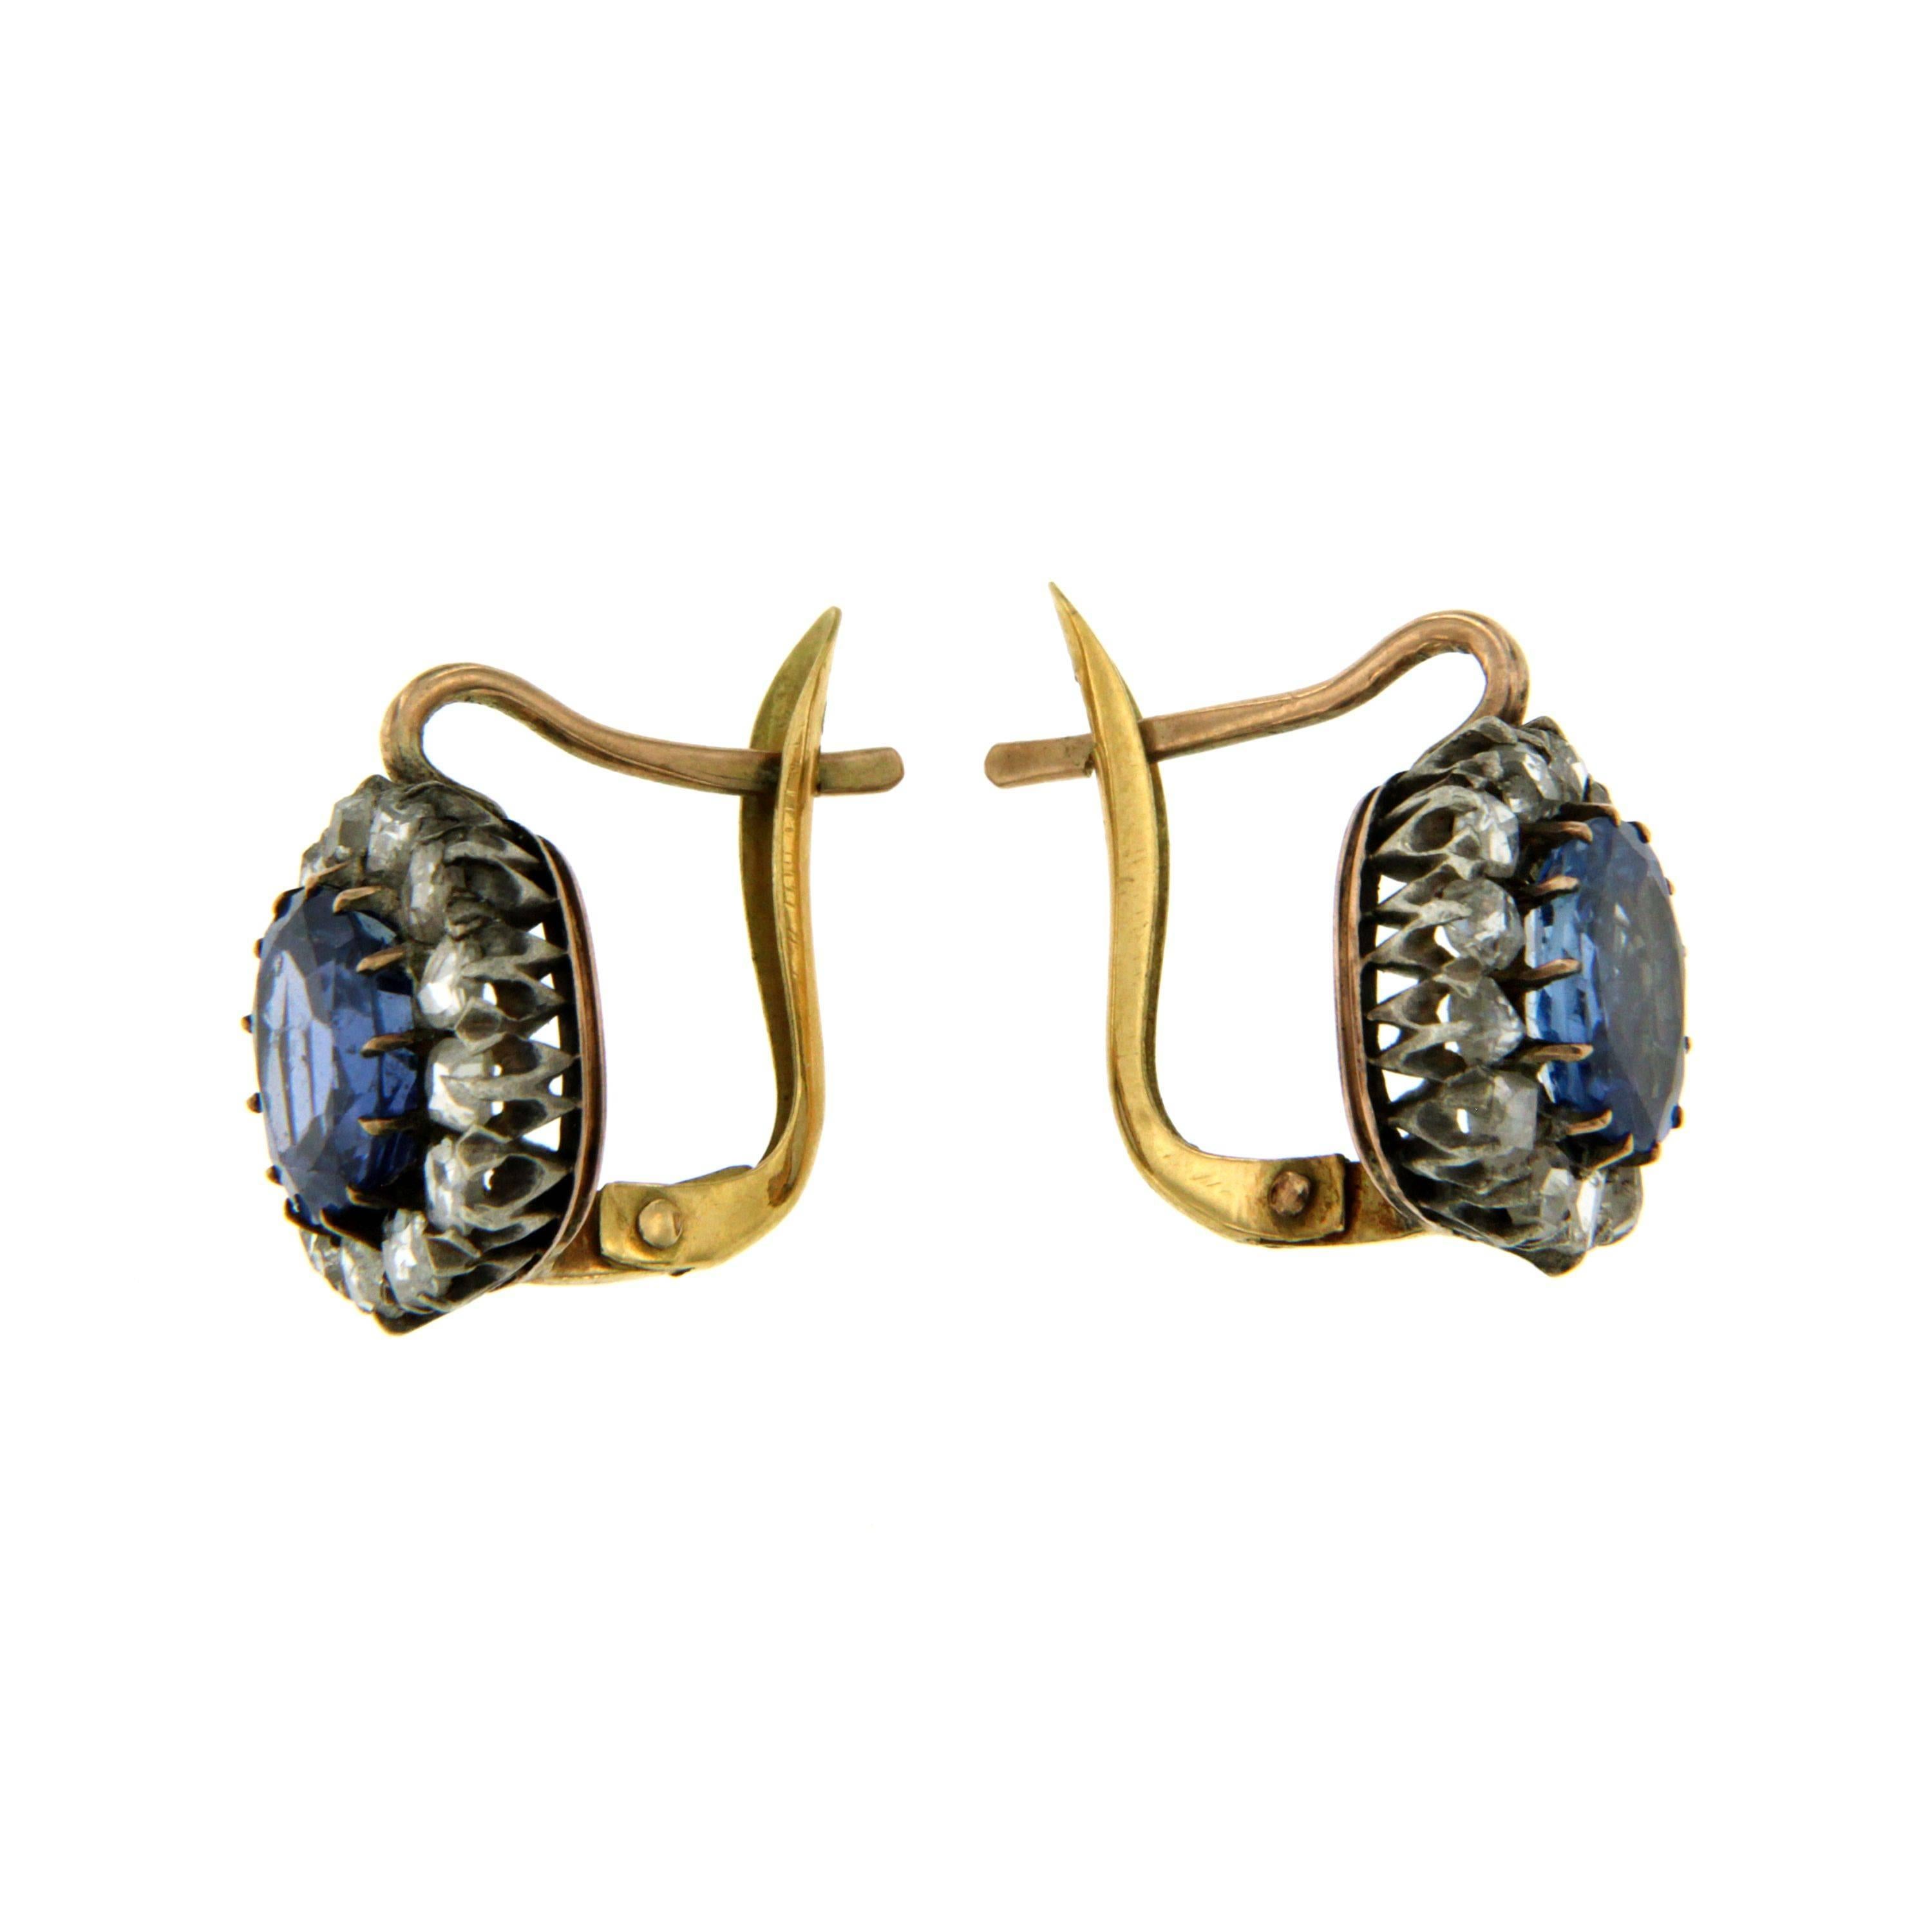 Victorian 12 kt gold and silver cluster earrings feauturing 2 center sapphires weighing approximately 5.47 total carats along with an approximate total diamond weight of 1.00 carats rose cut diamonds. Circa 1890.

CONDITION: Pre-owned - Excellent